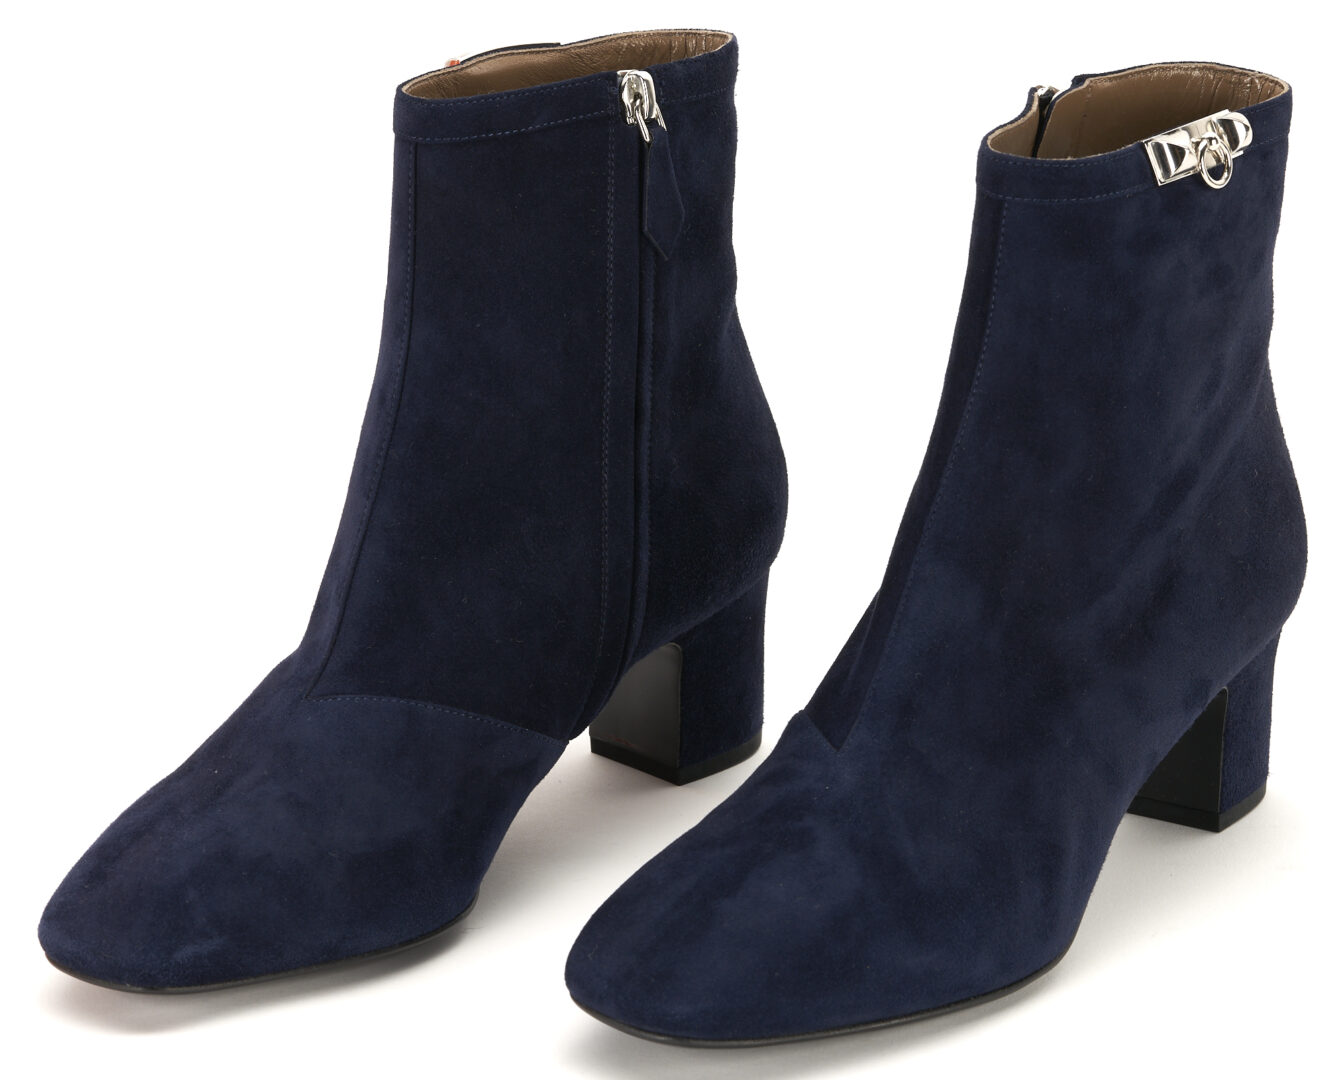 Lot 1169: 3 Pairs of Hermes Ankle Boots, incl. Leather Sock, Blue Suede Saint Germain, Brown Suede